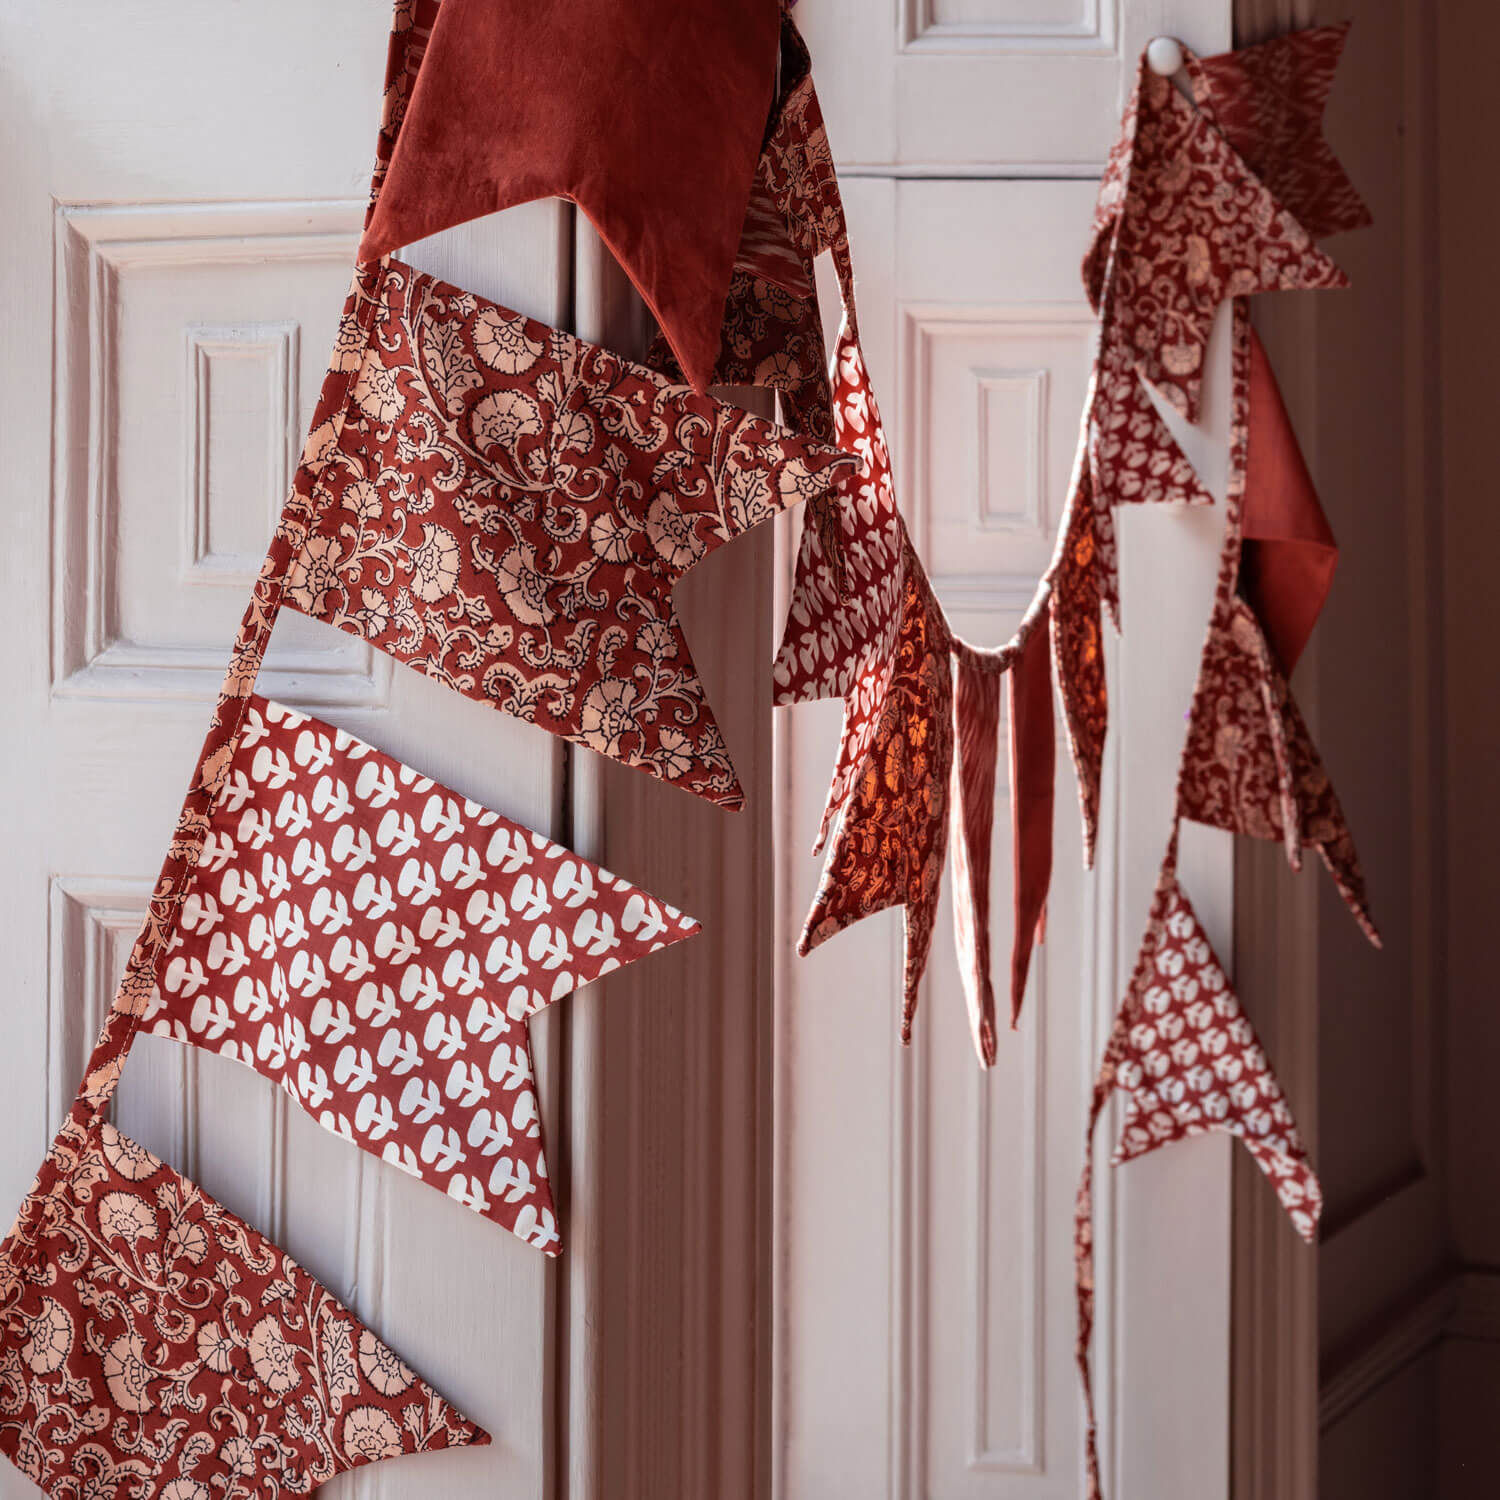 Read more about Graham and green pennant flag bunting